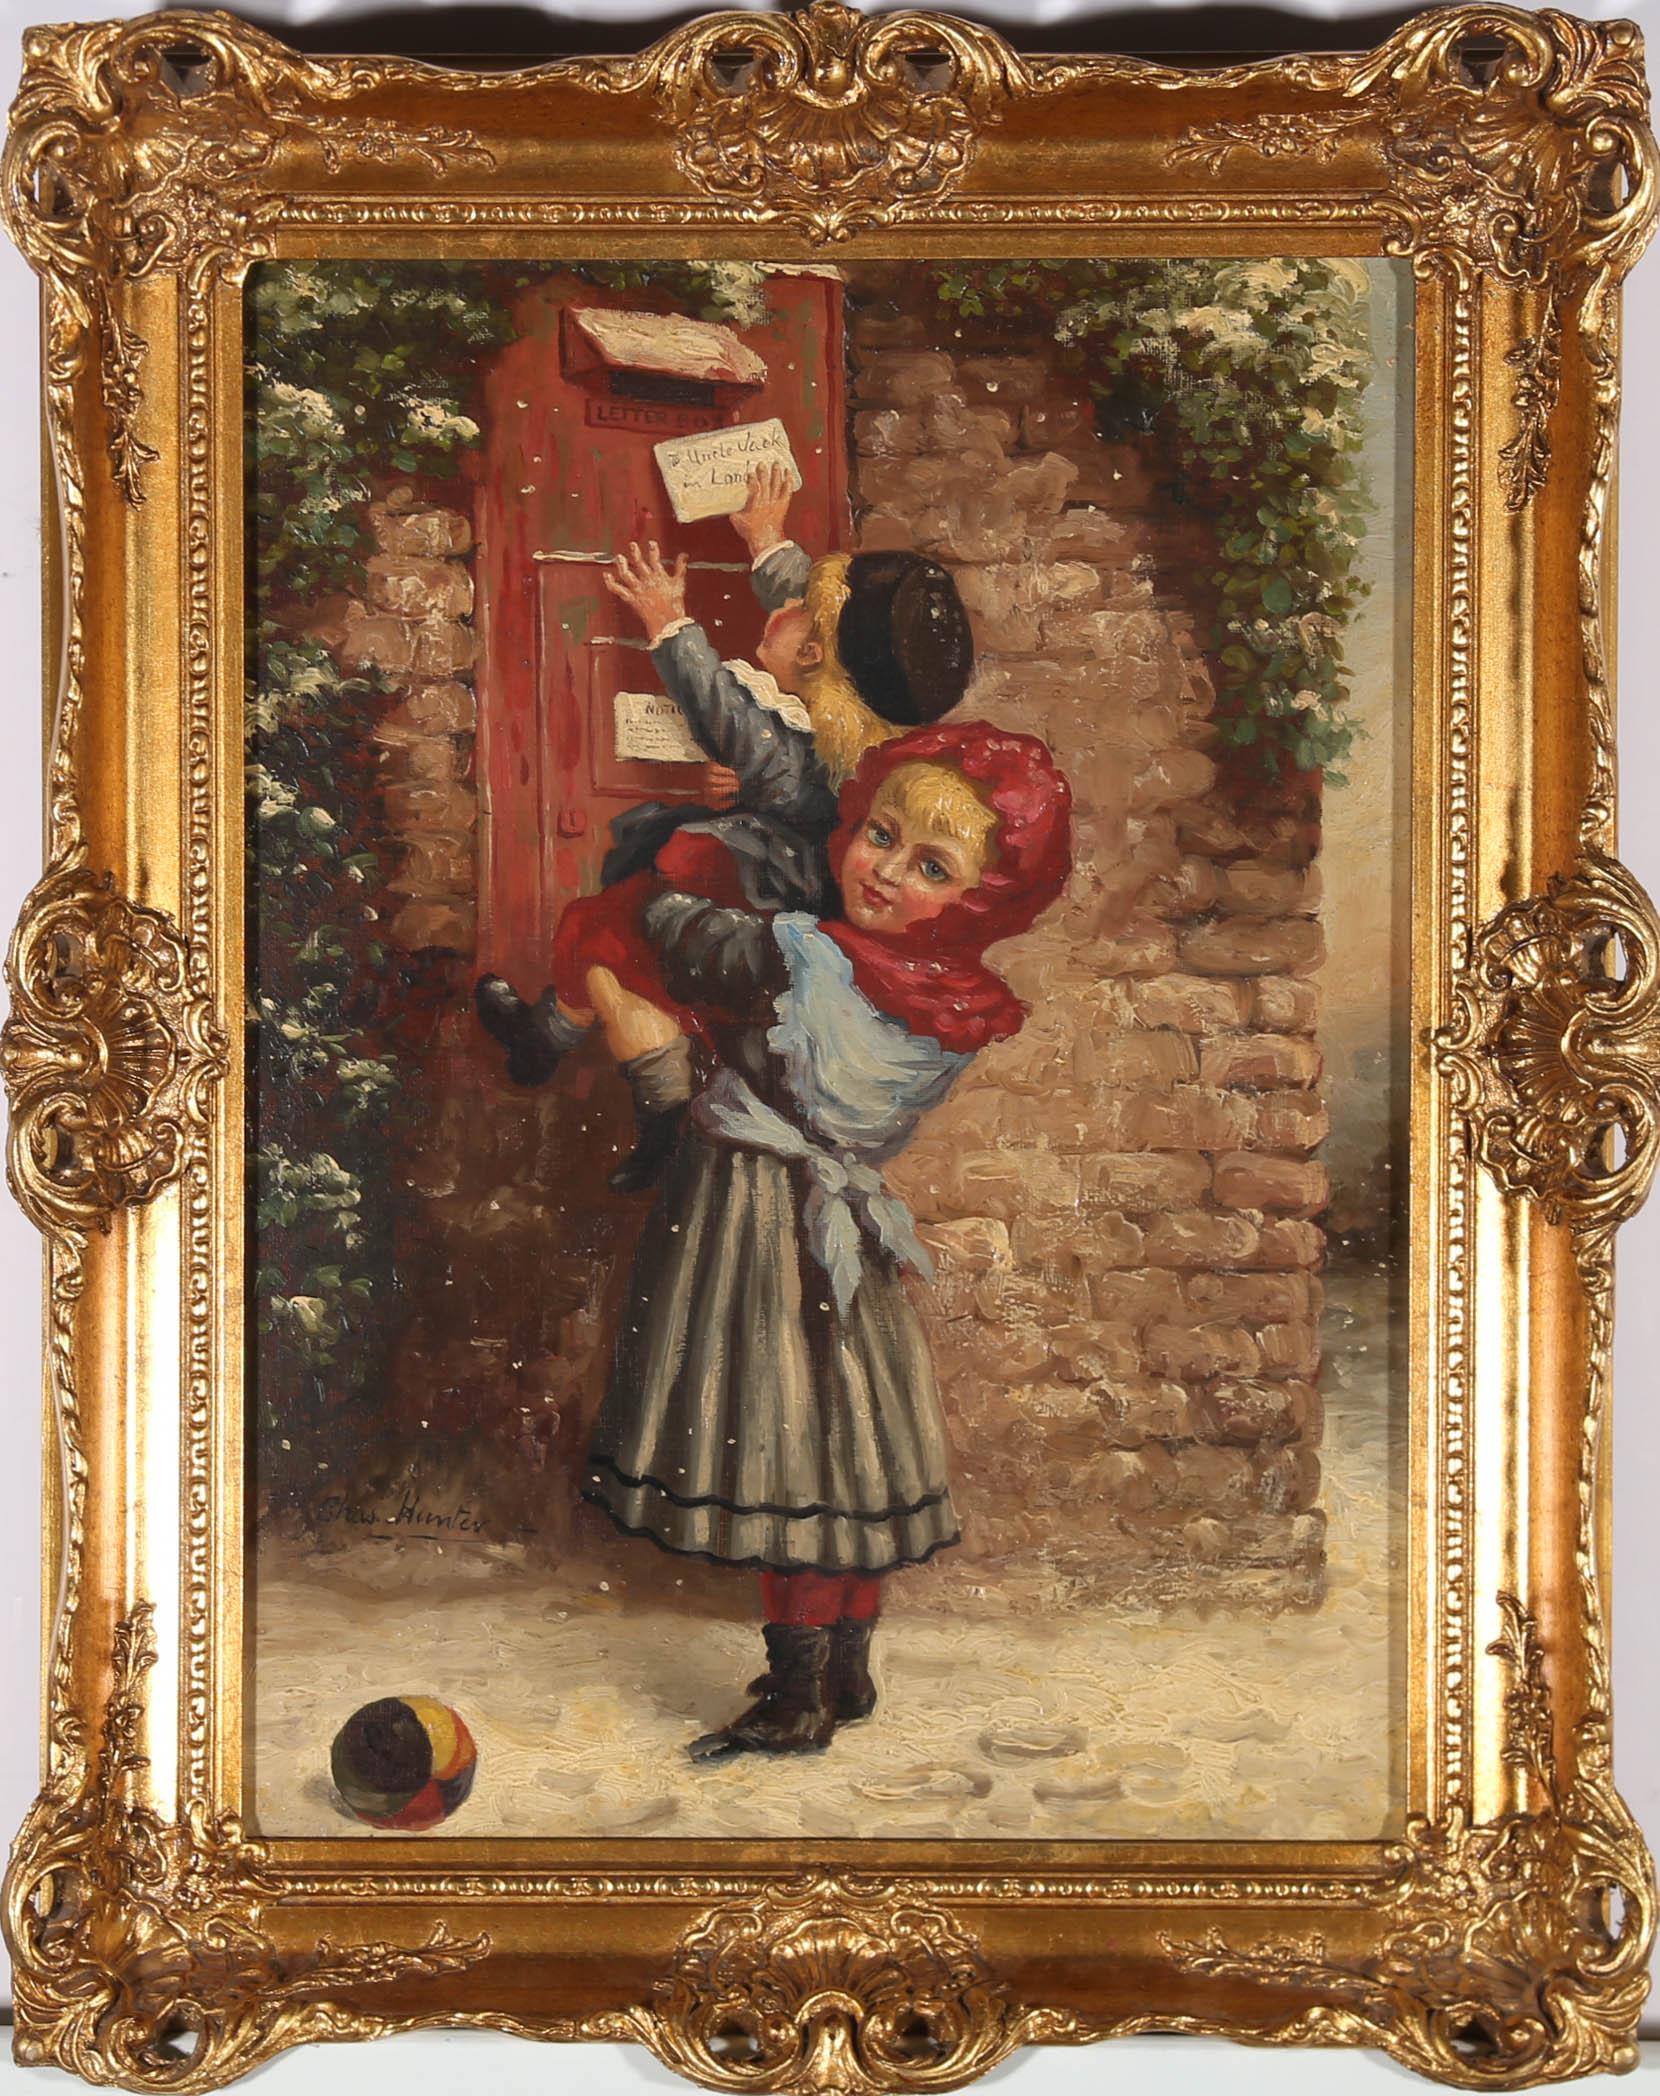 A delightful scene depicting a girl picking up her younger brother to help him post a letter addressed to their Uncle Jack. The artist captures the children on a snowy lane before a stone wall and traditional English letterbox. Signed to the lower